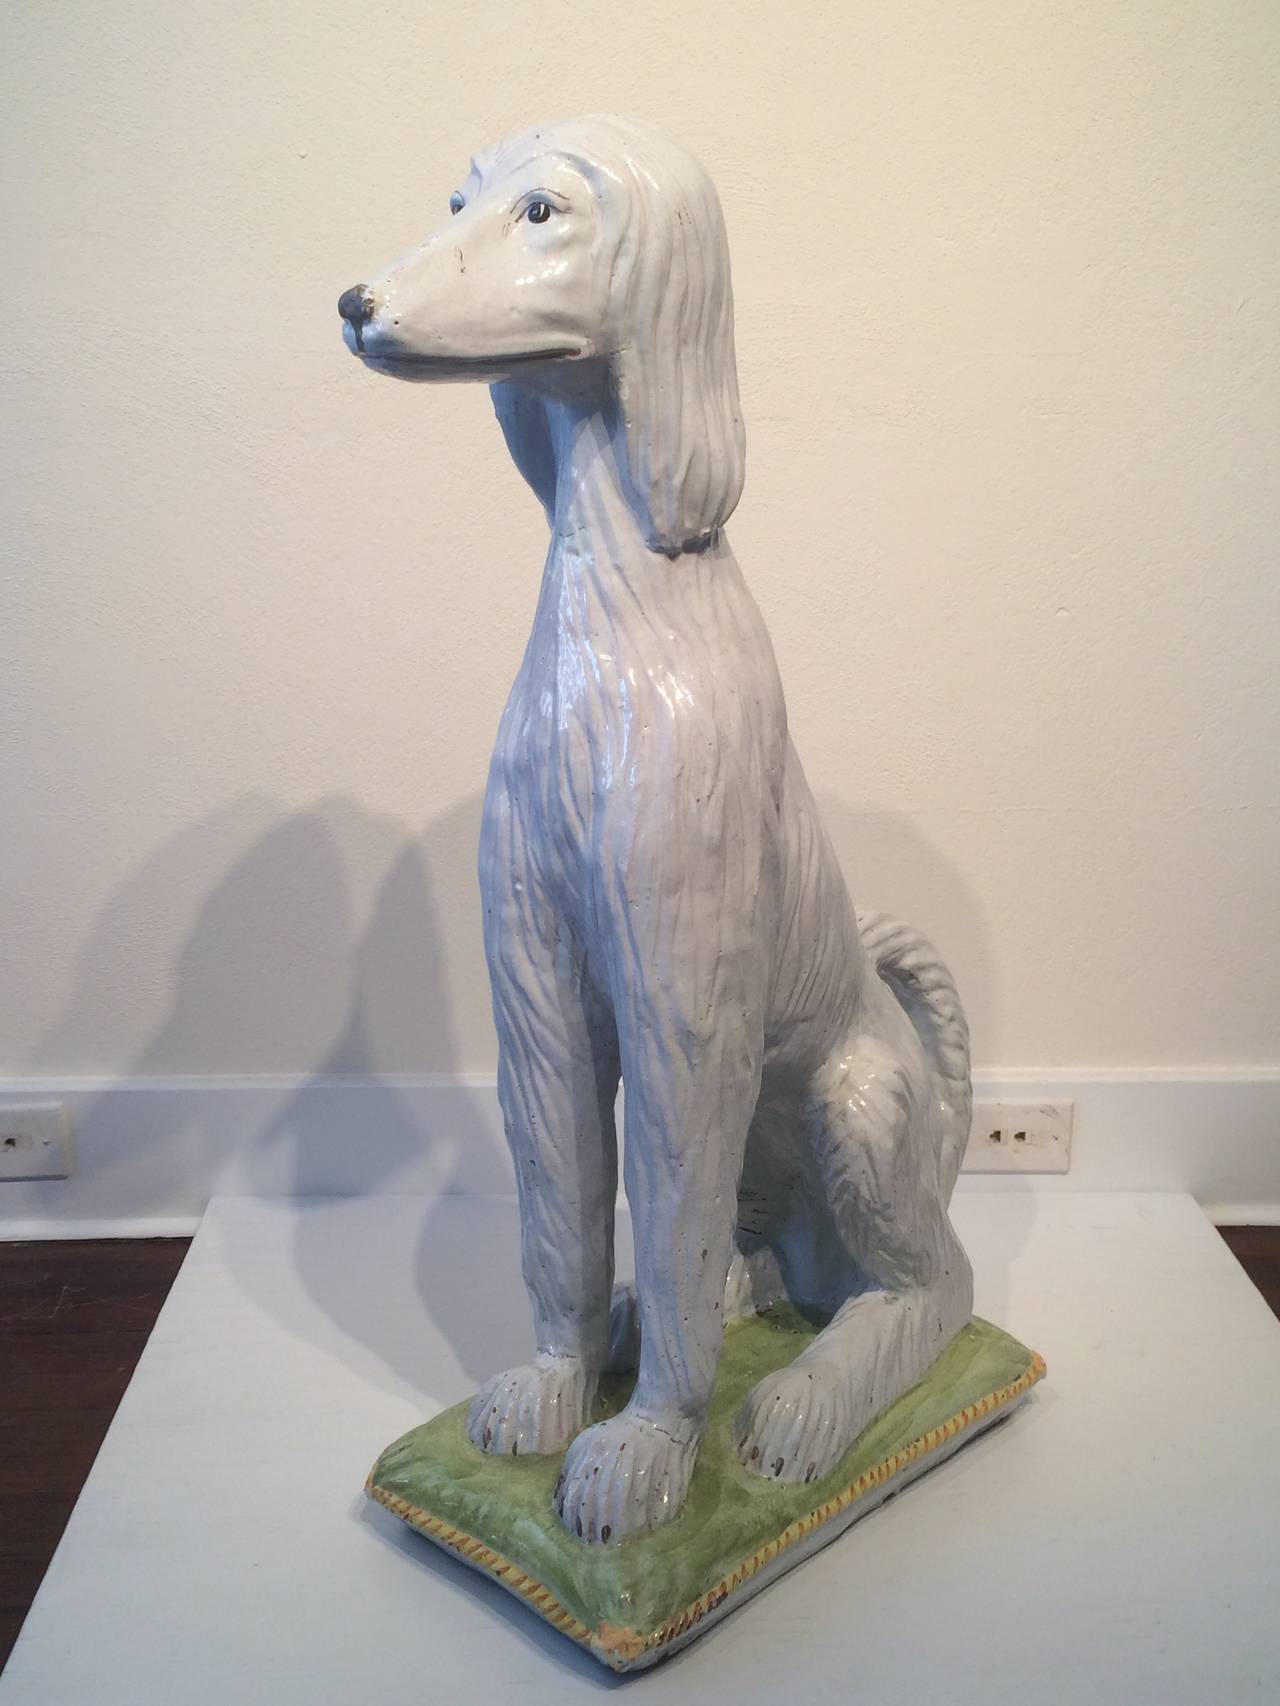 Life-size Afghan hound seated on cushion; dog sculpture
Glazed and painted ceramic,
Italy, 1950s.
